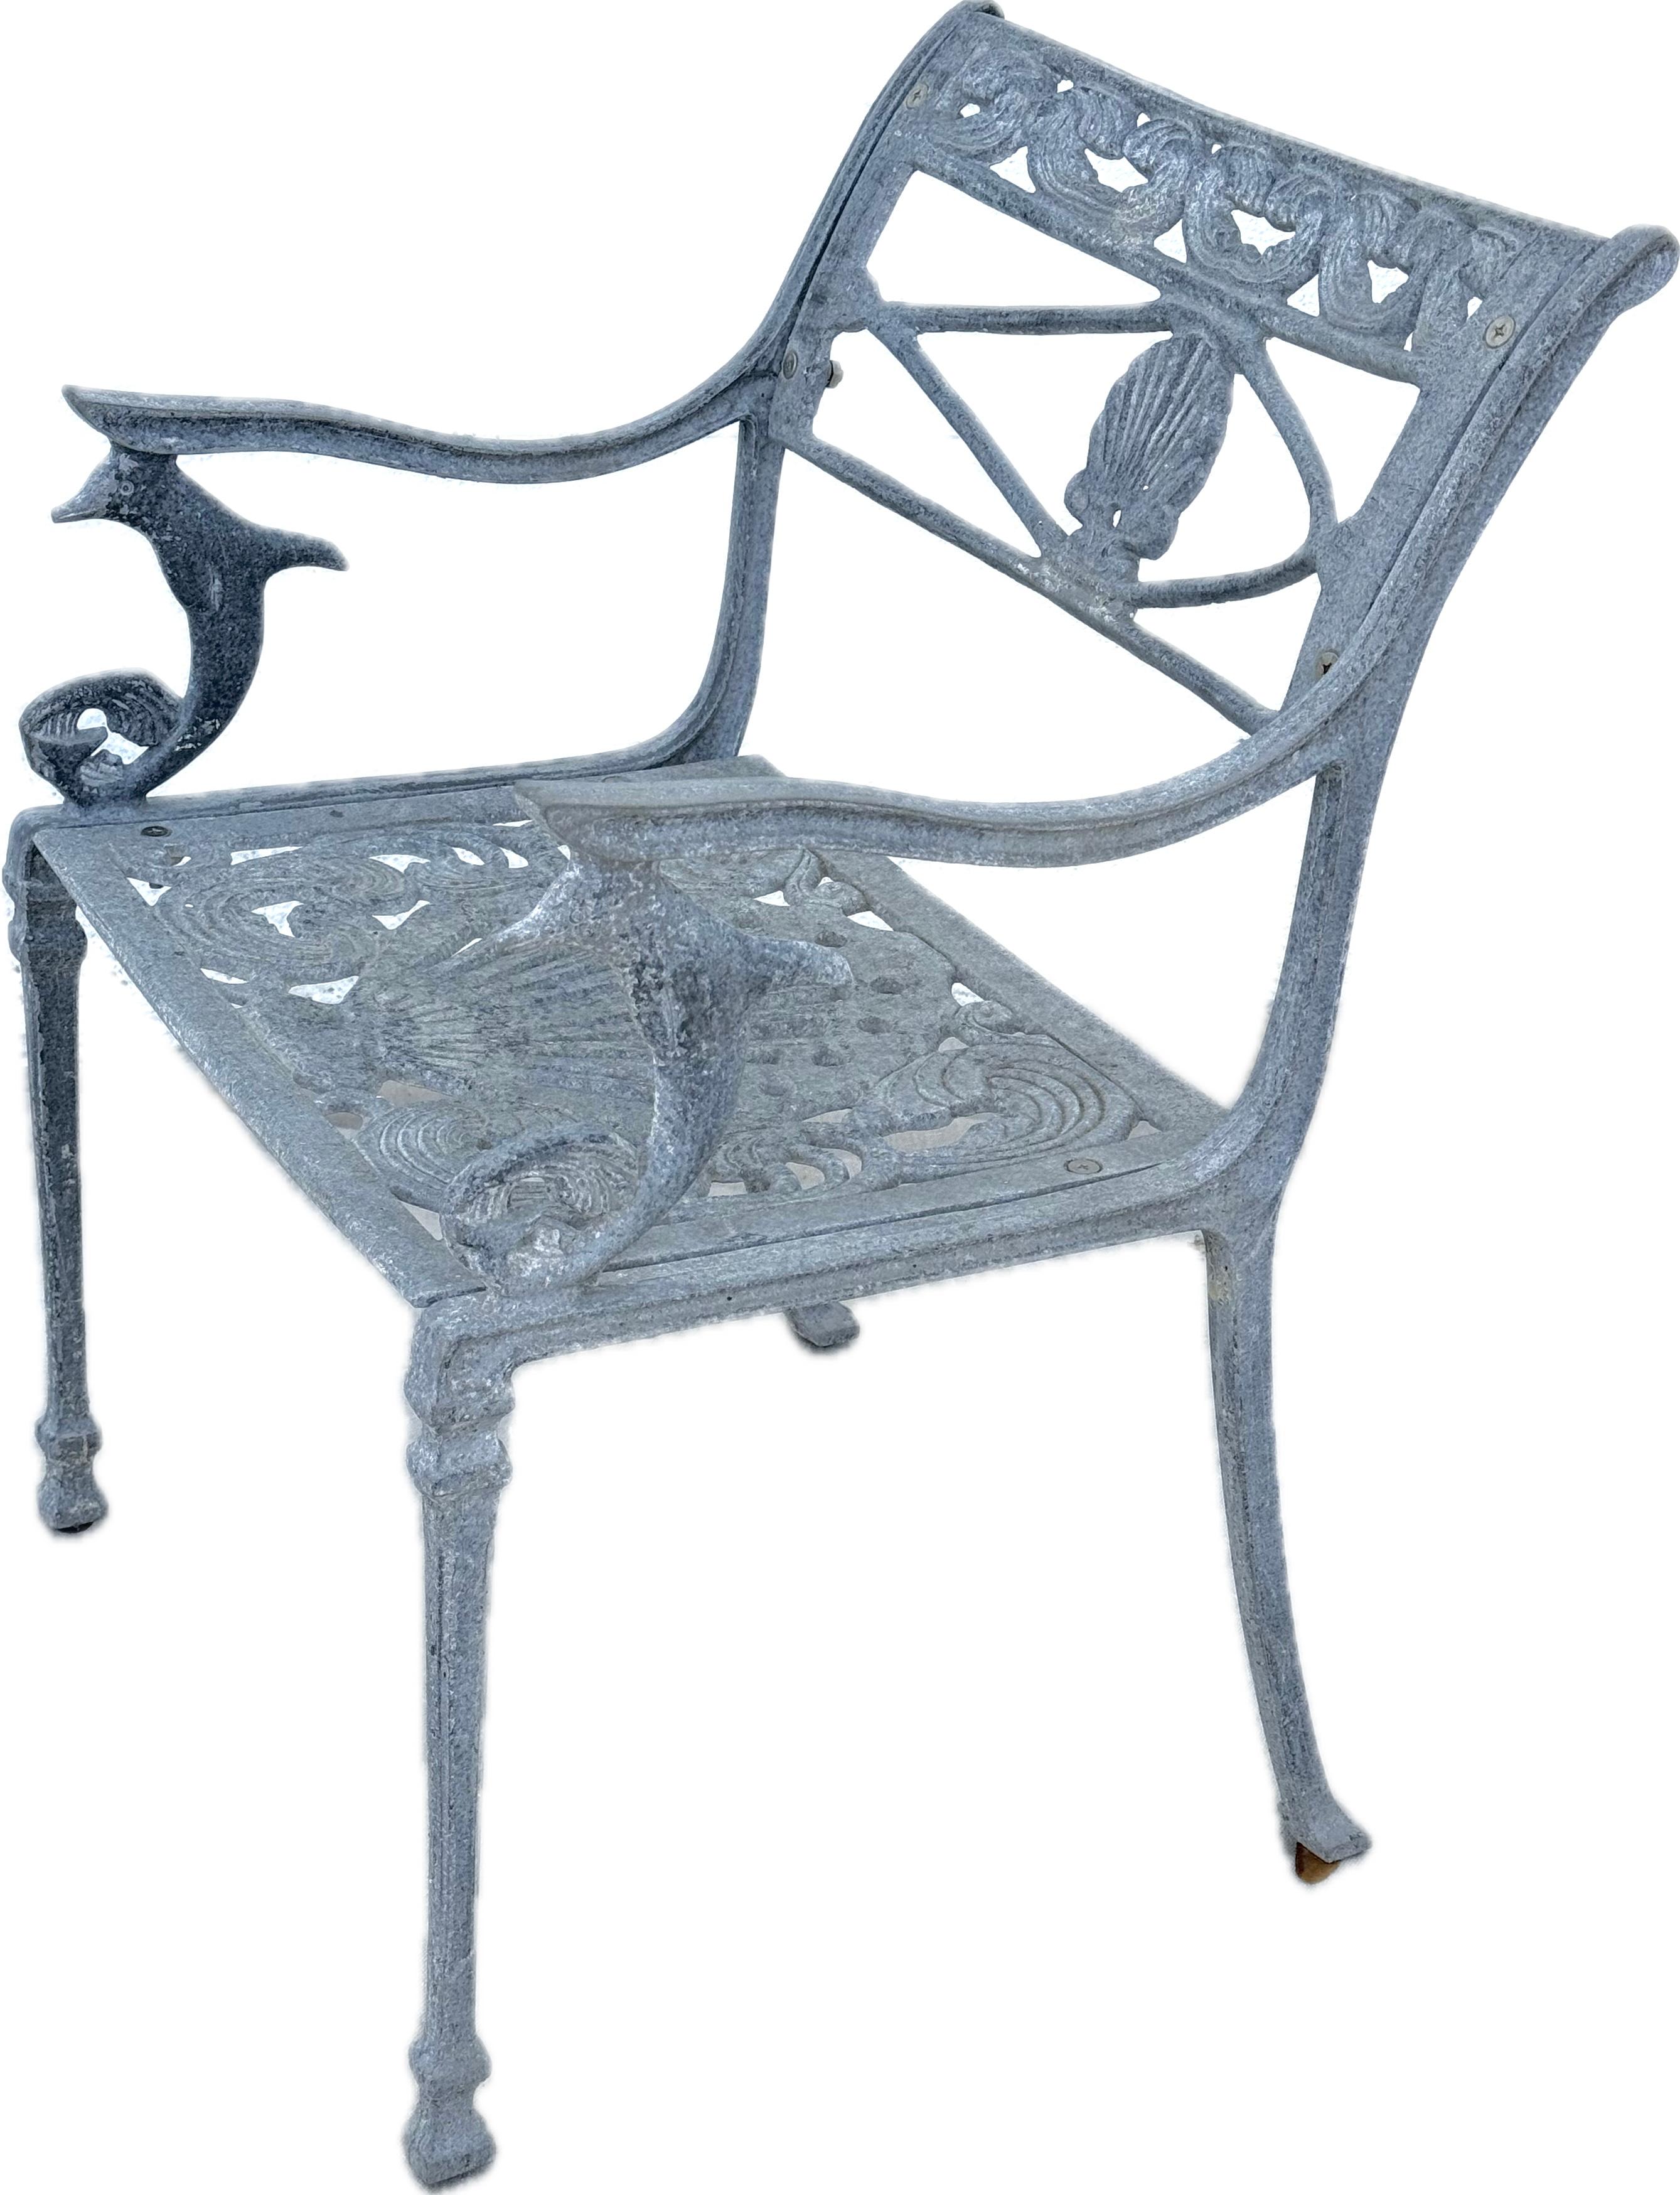 Unique 20th century Directoire Style Dolphin And Shell Garden Patio Armchair. Chair is made of cast aluminum featuring dolphins on each arm and a center shell back as well as a large shell seat. They are of solid construction with a vintage matte